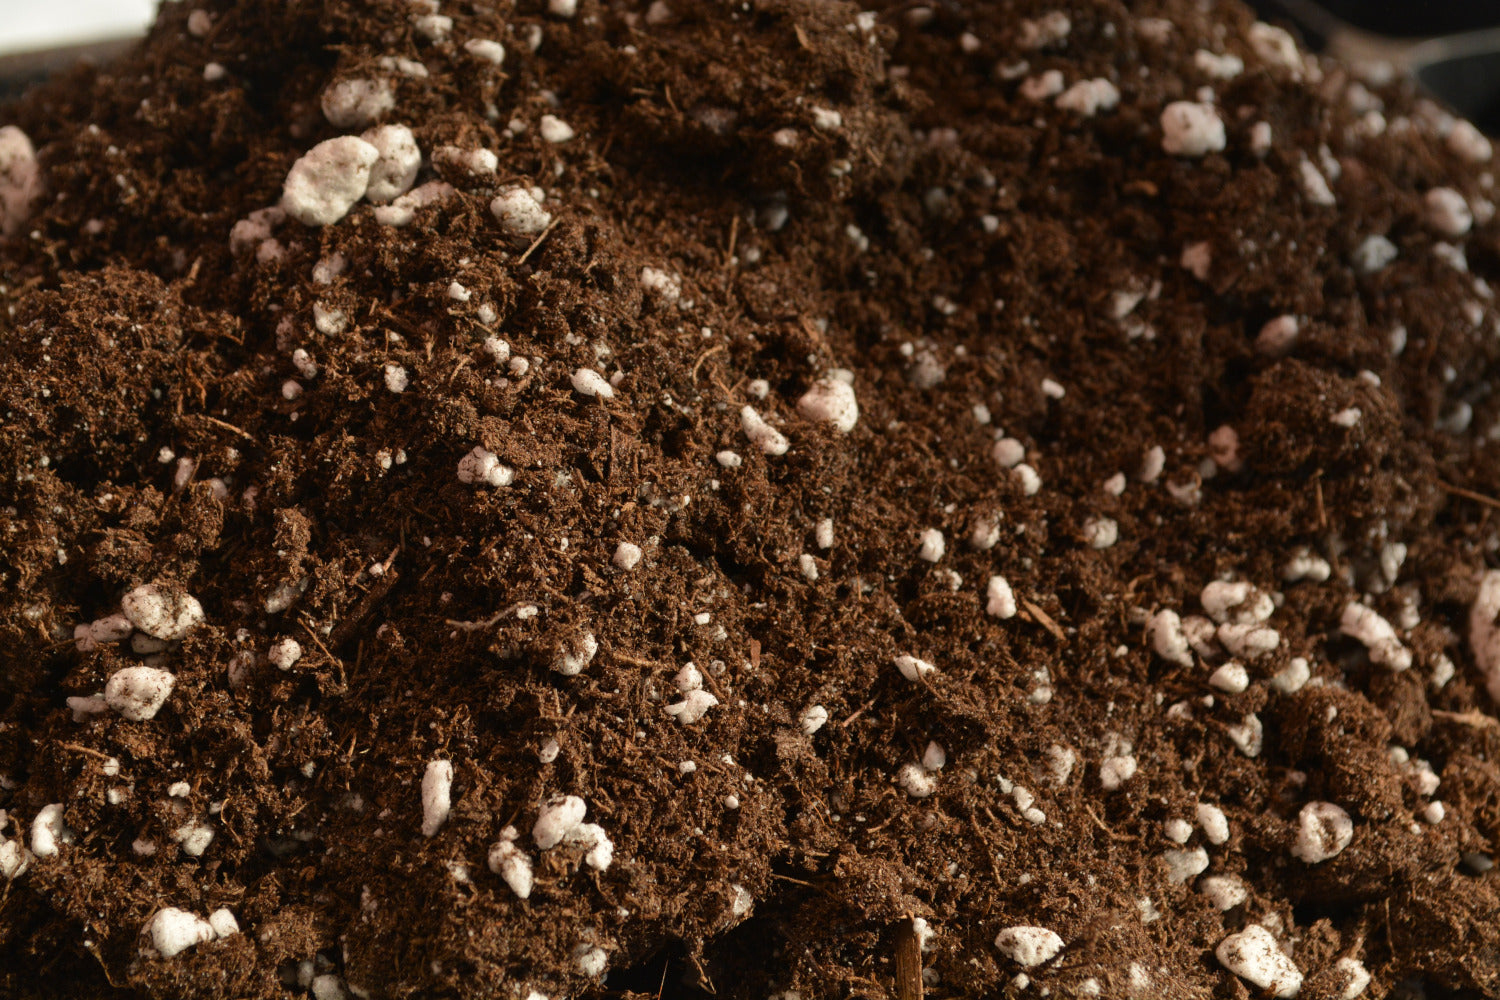 Selecting the best soil for starting your seeds